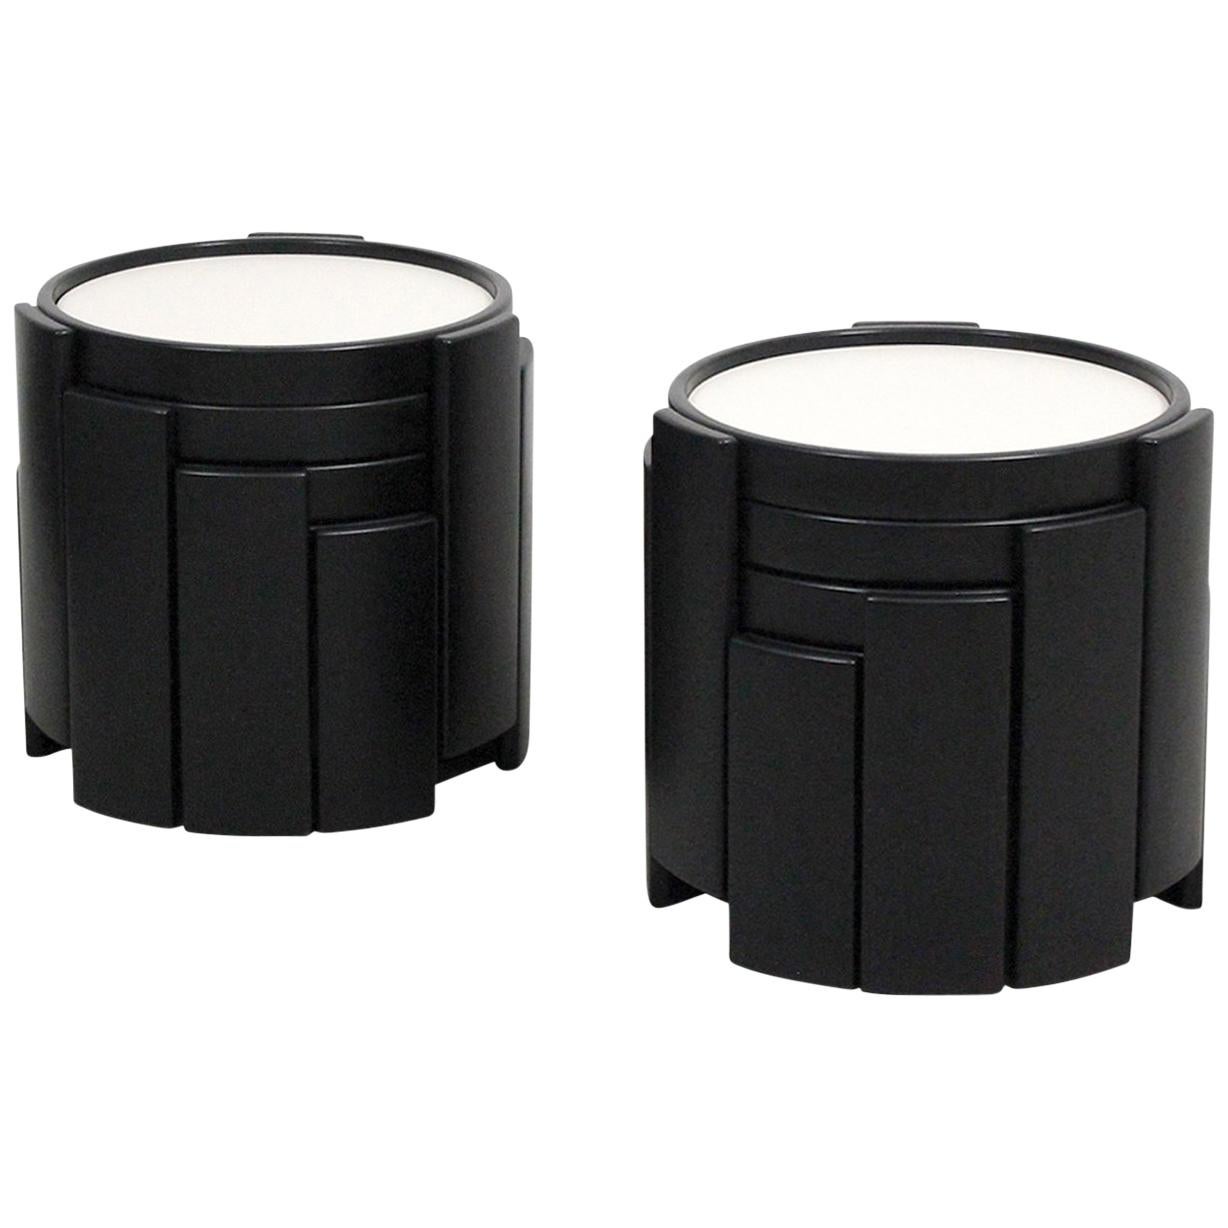 Pair of Stacking Gianfranco Frattini for Cassina Nesting Tables